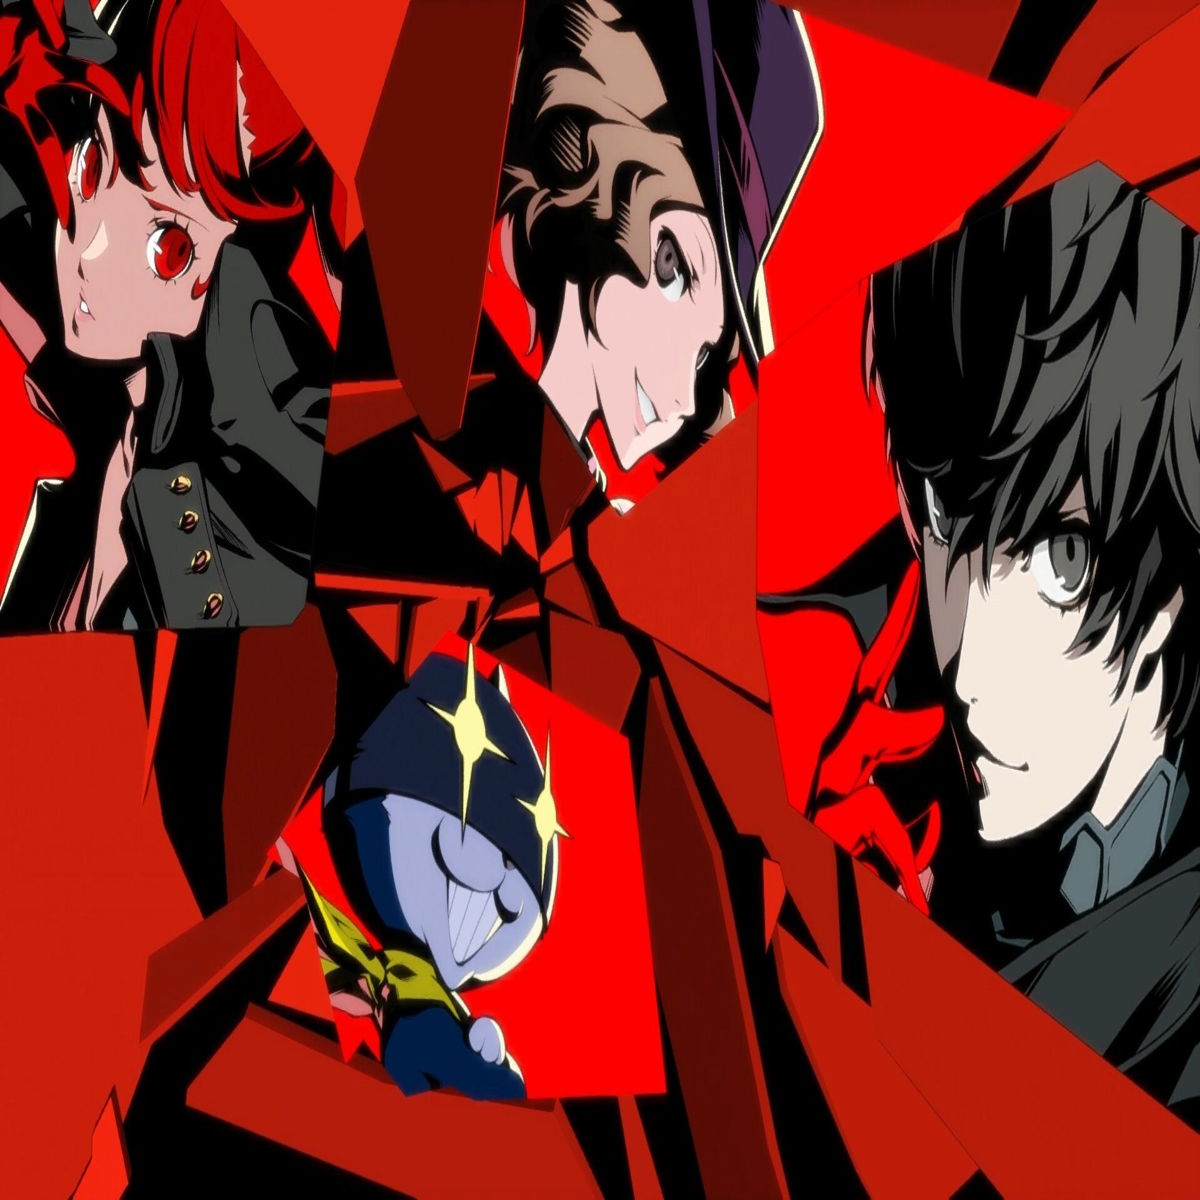 Persona 5 Royal finally hits PC this week and here's why it's